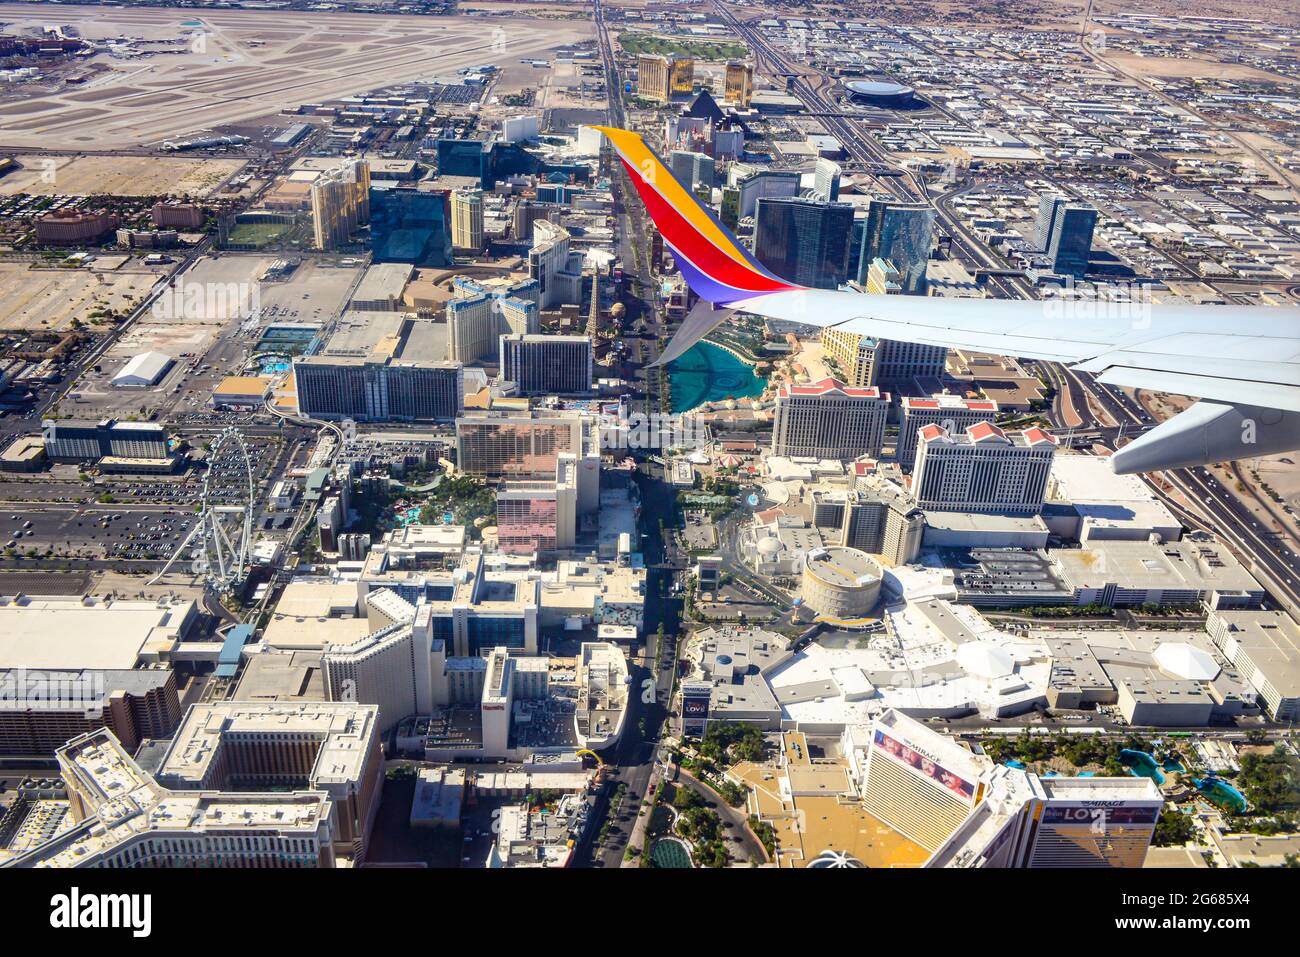 A wing tip of a 780 Max airplane in the foreground aerial view of the Vegas strip after liftoff from Las Vegas McCarran International Airport, NV Stock Photo